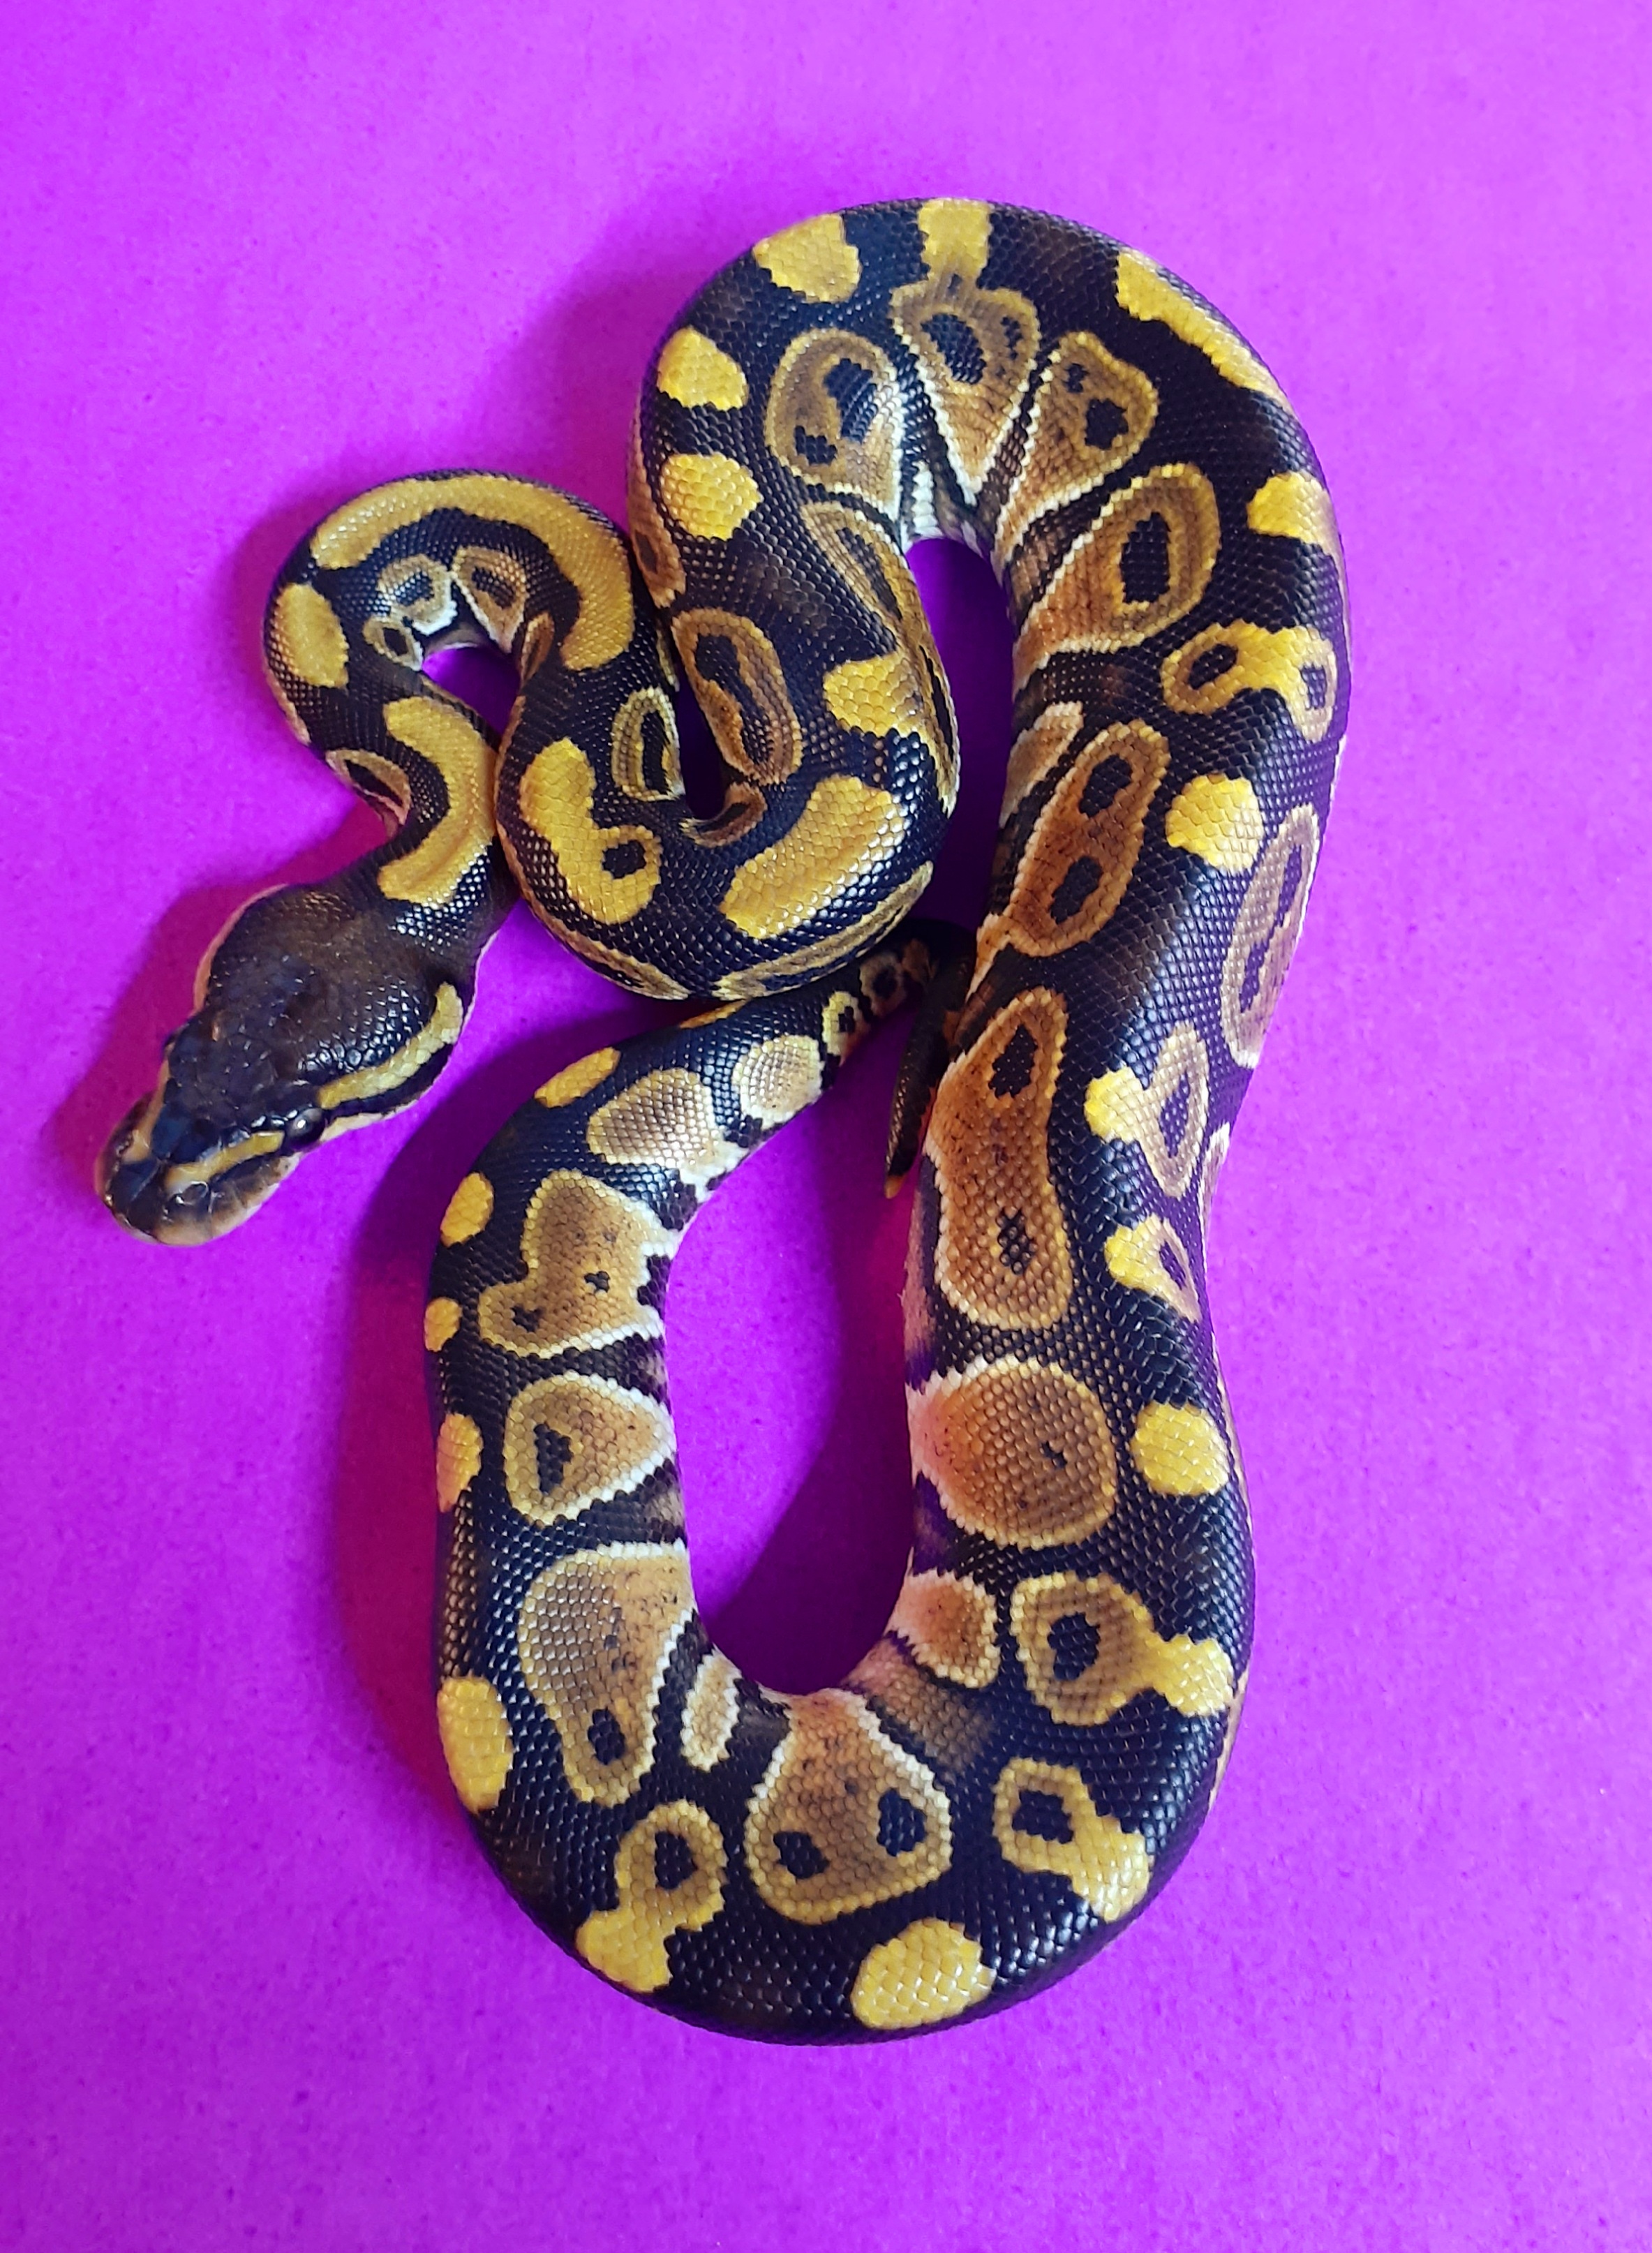 Russo Ball Python by M.D. Exotics